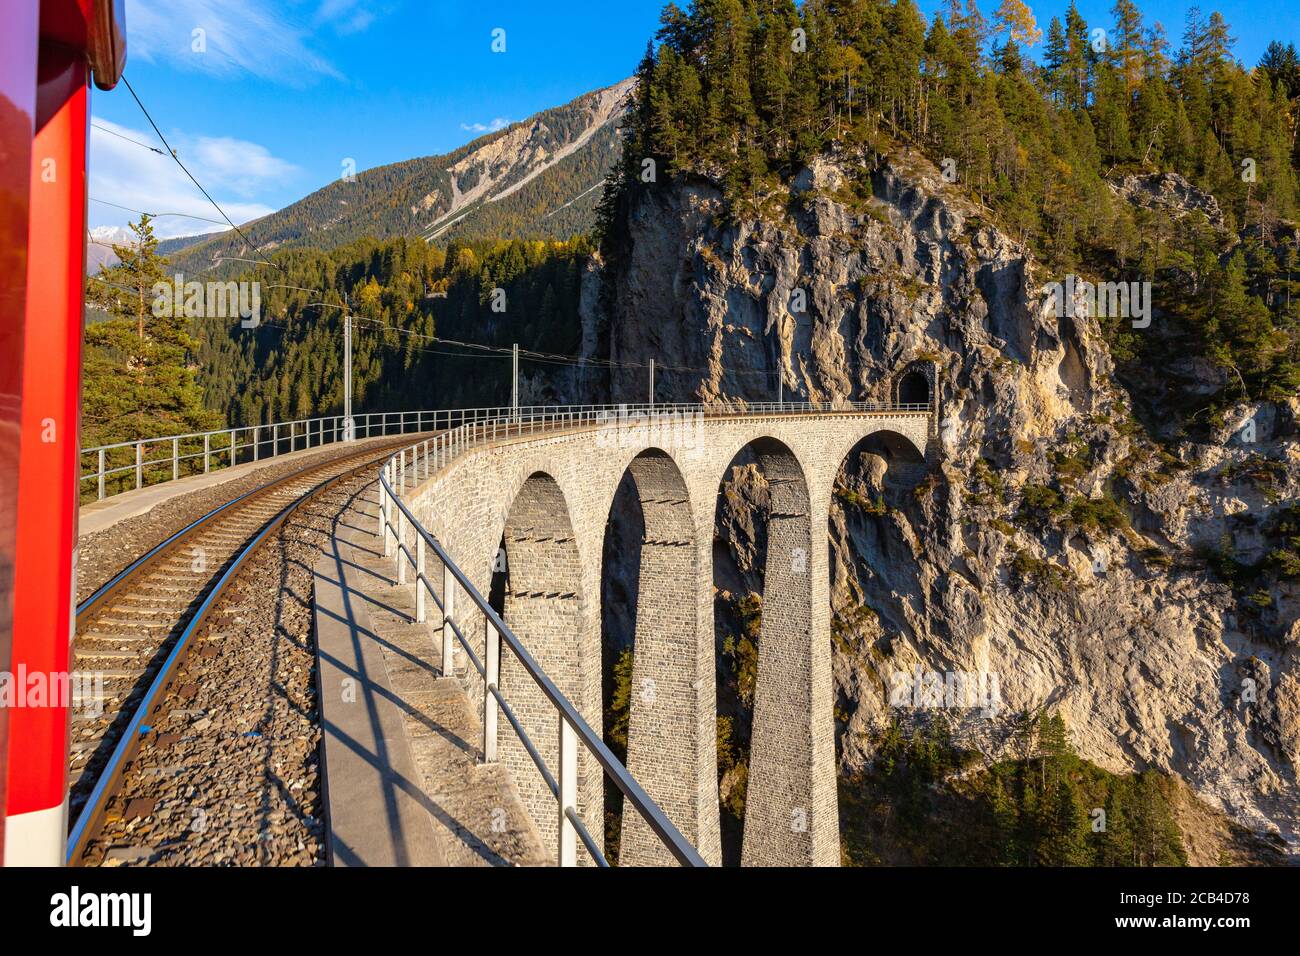 Travel with the red Rhaetian railway sightseeing train Bernina Express running over Landwasser Viaduct on sunny autumn day with blue sky cloud, Canon Stock Photo